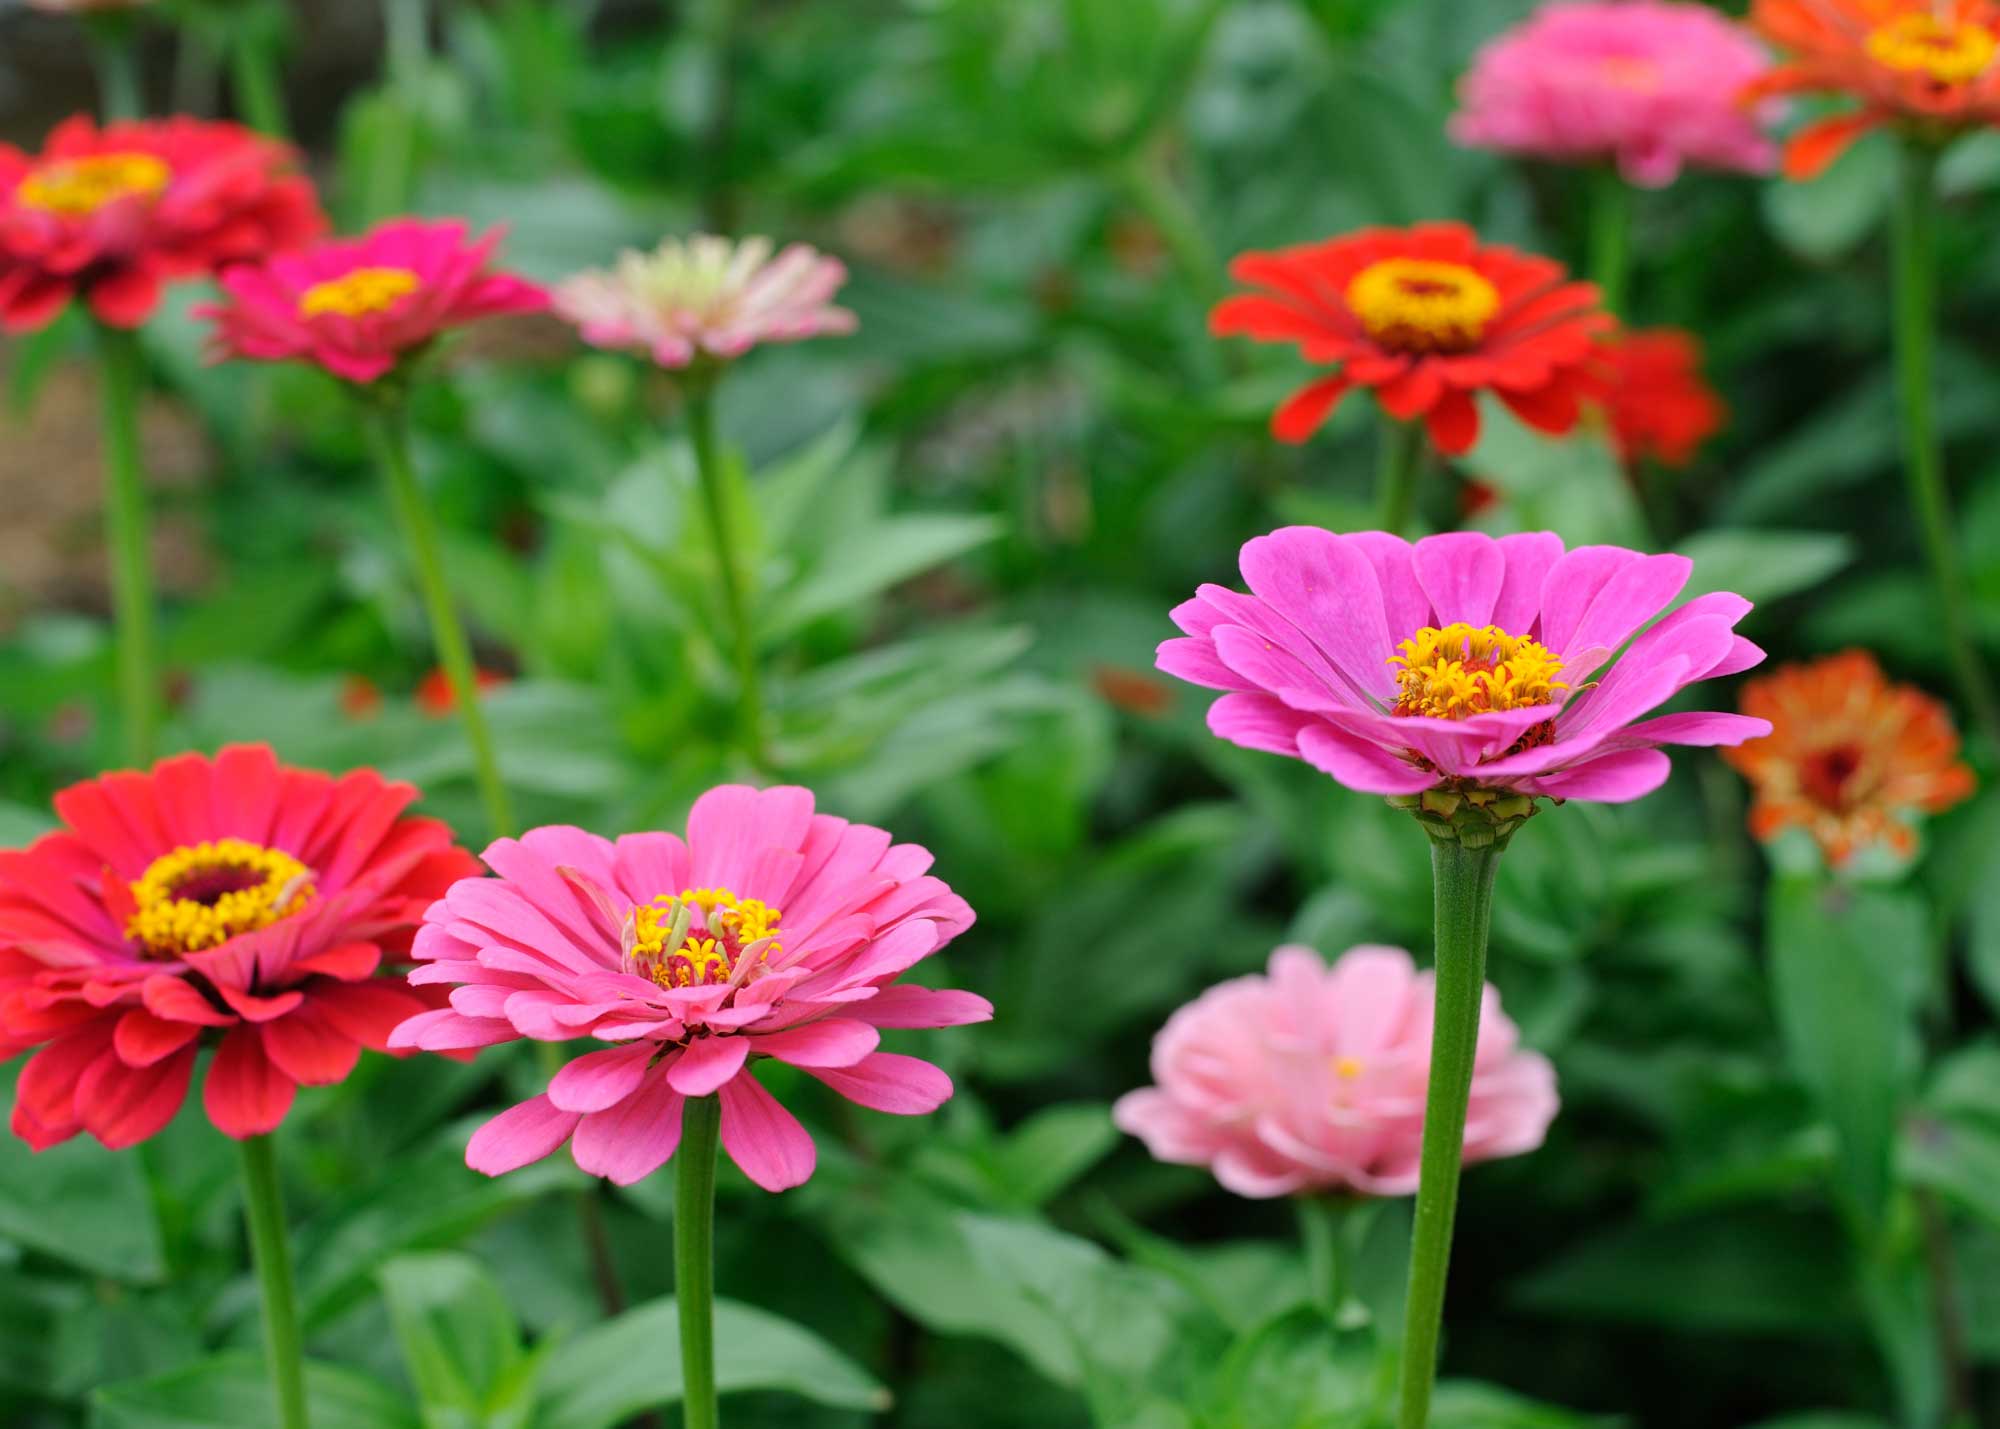 How to grow zinnia flowers from seed